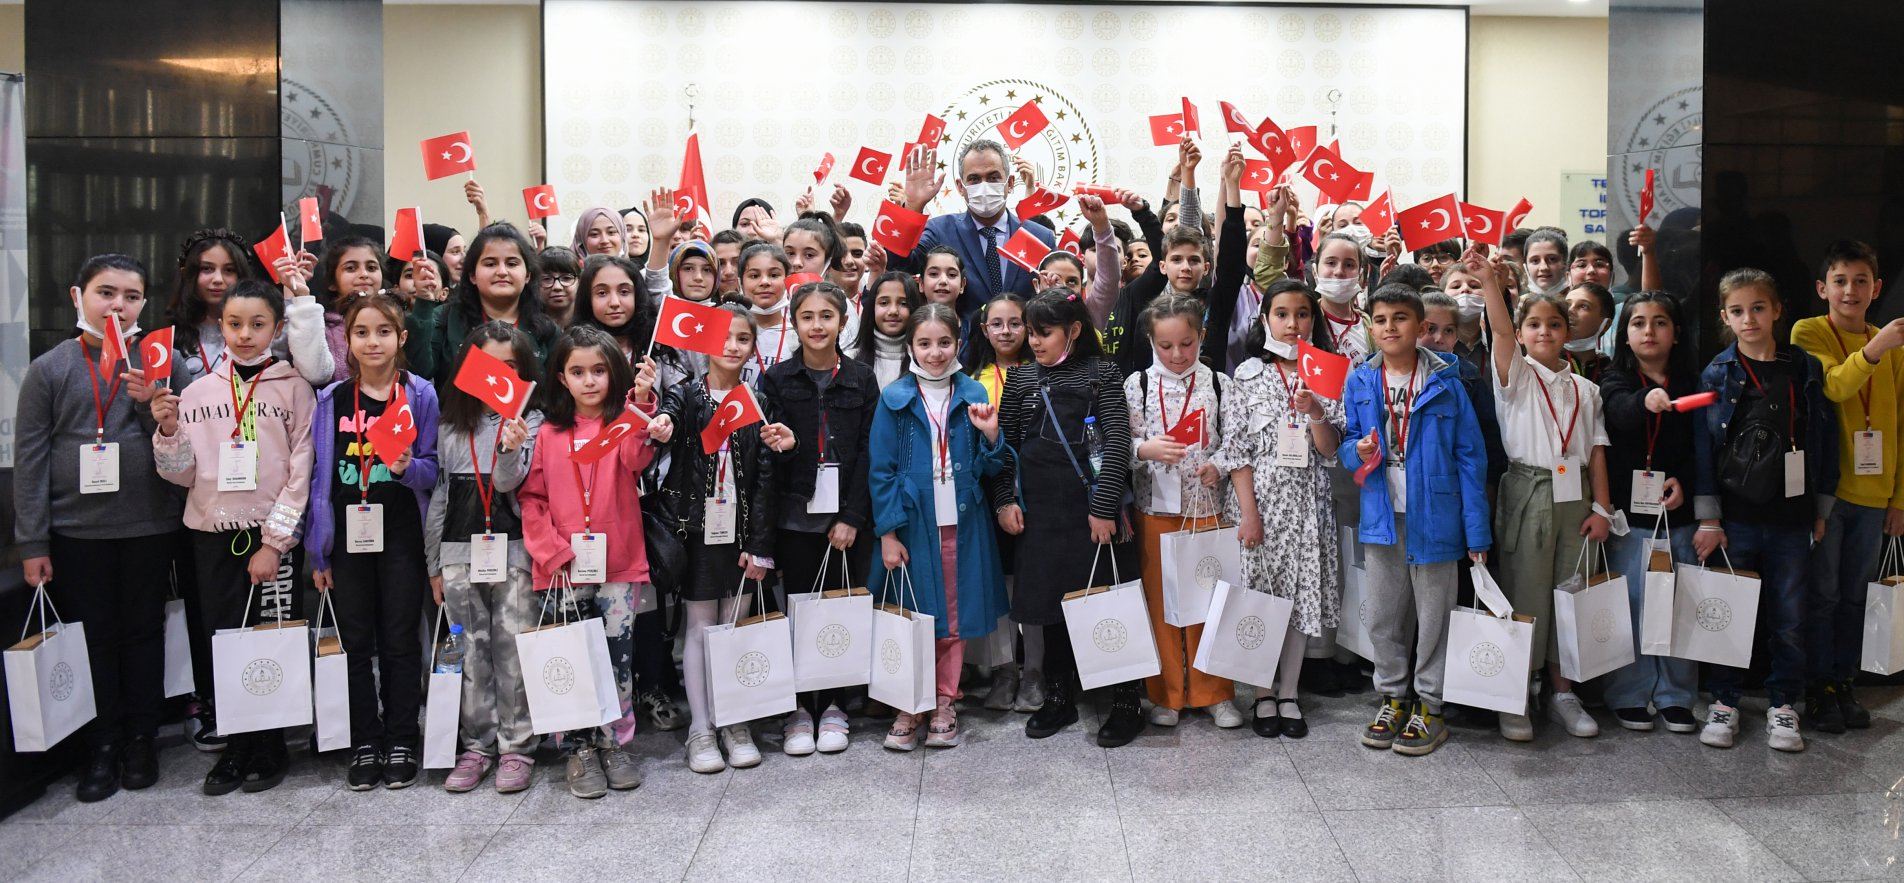 MINISTER ÖZER RECEIVES THE MEMBERS OF 